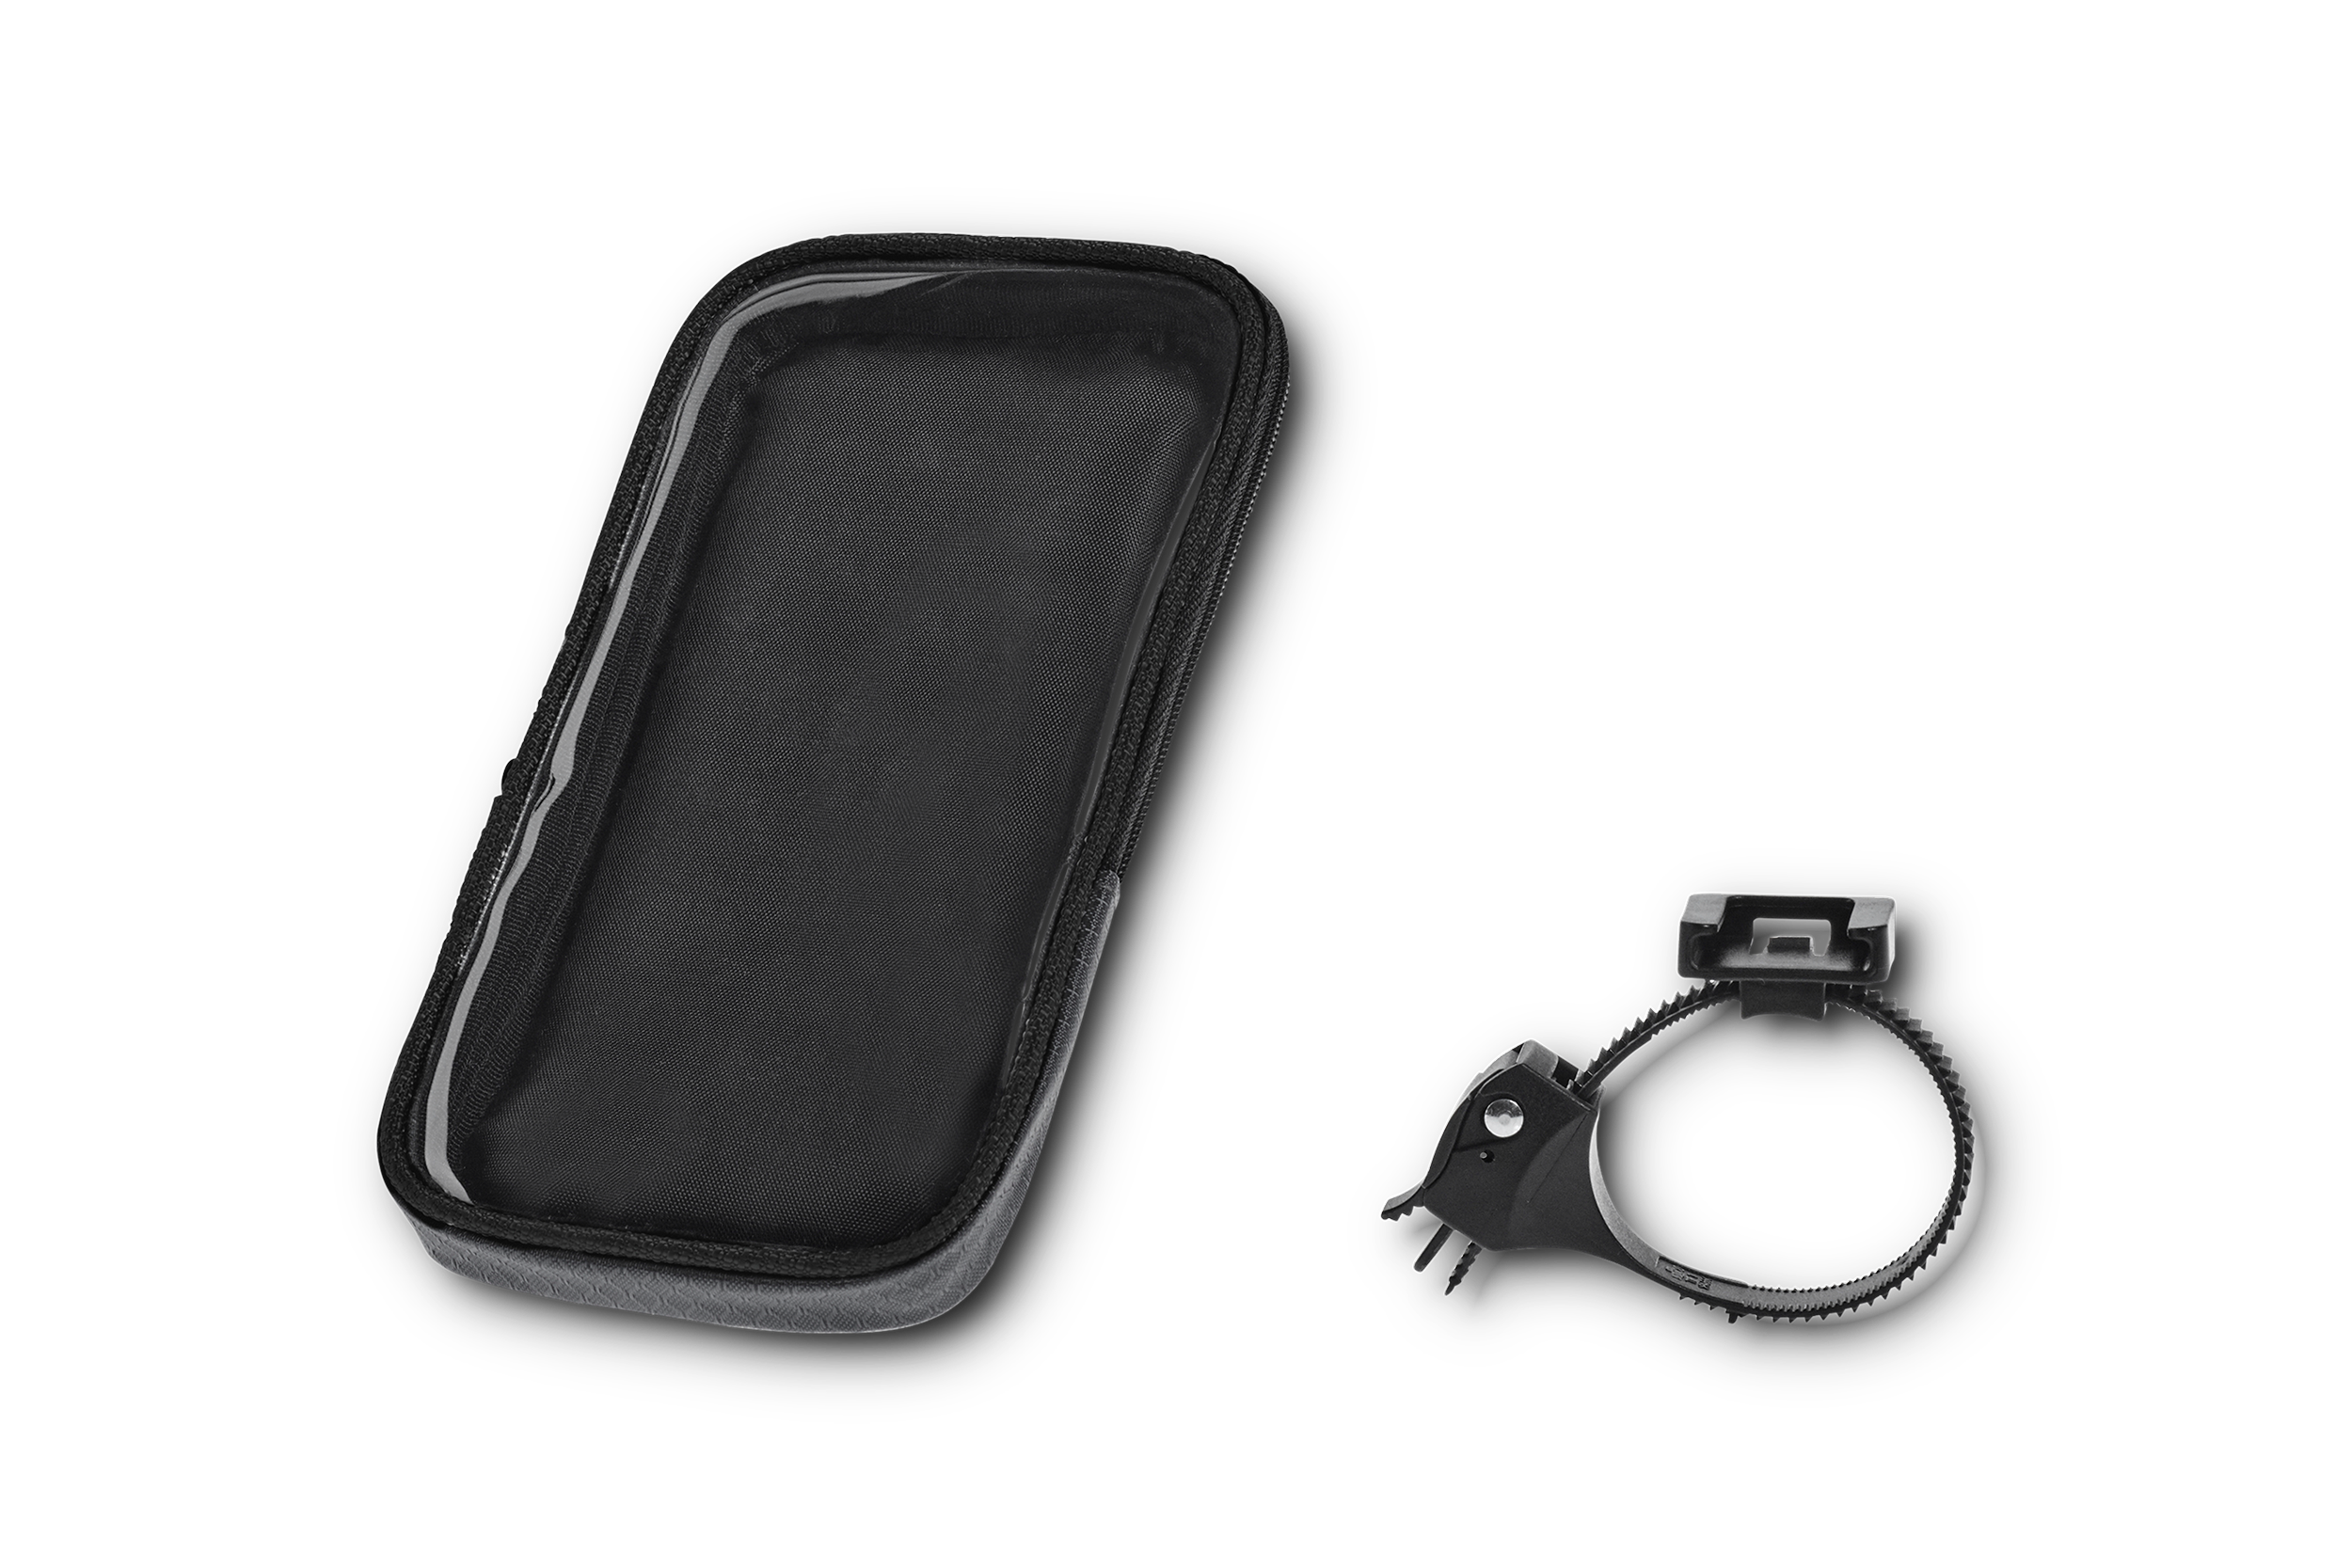 RFR Mobile Phone Mount S